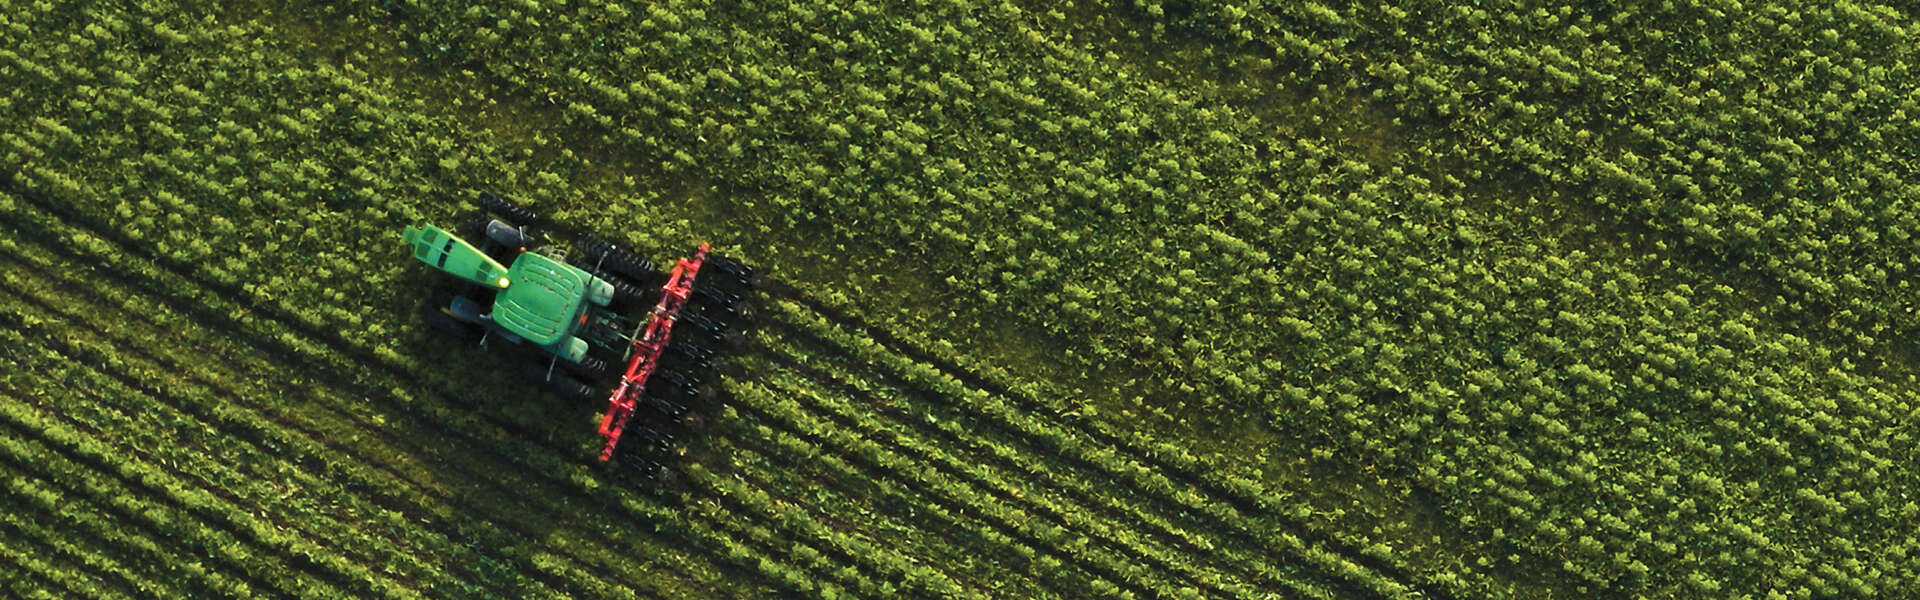 An aerial shot of a tractor moving diagonally across a green fiedl